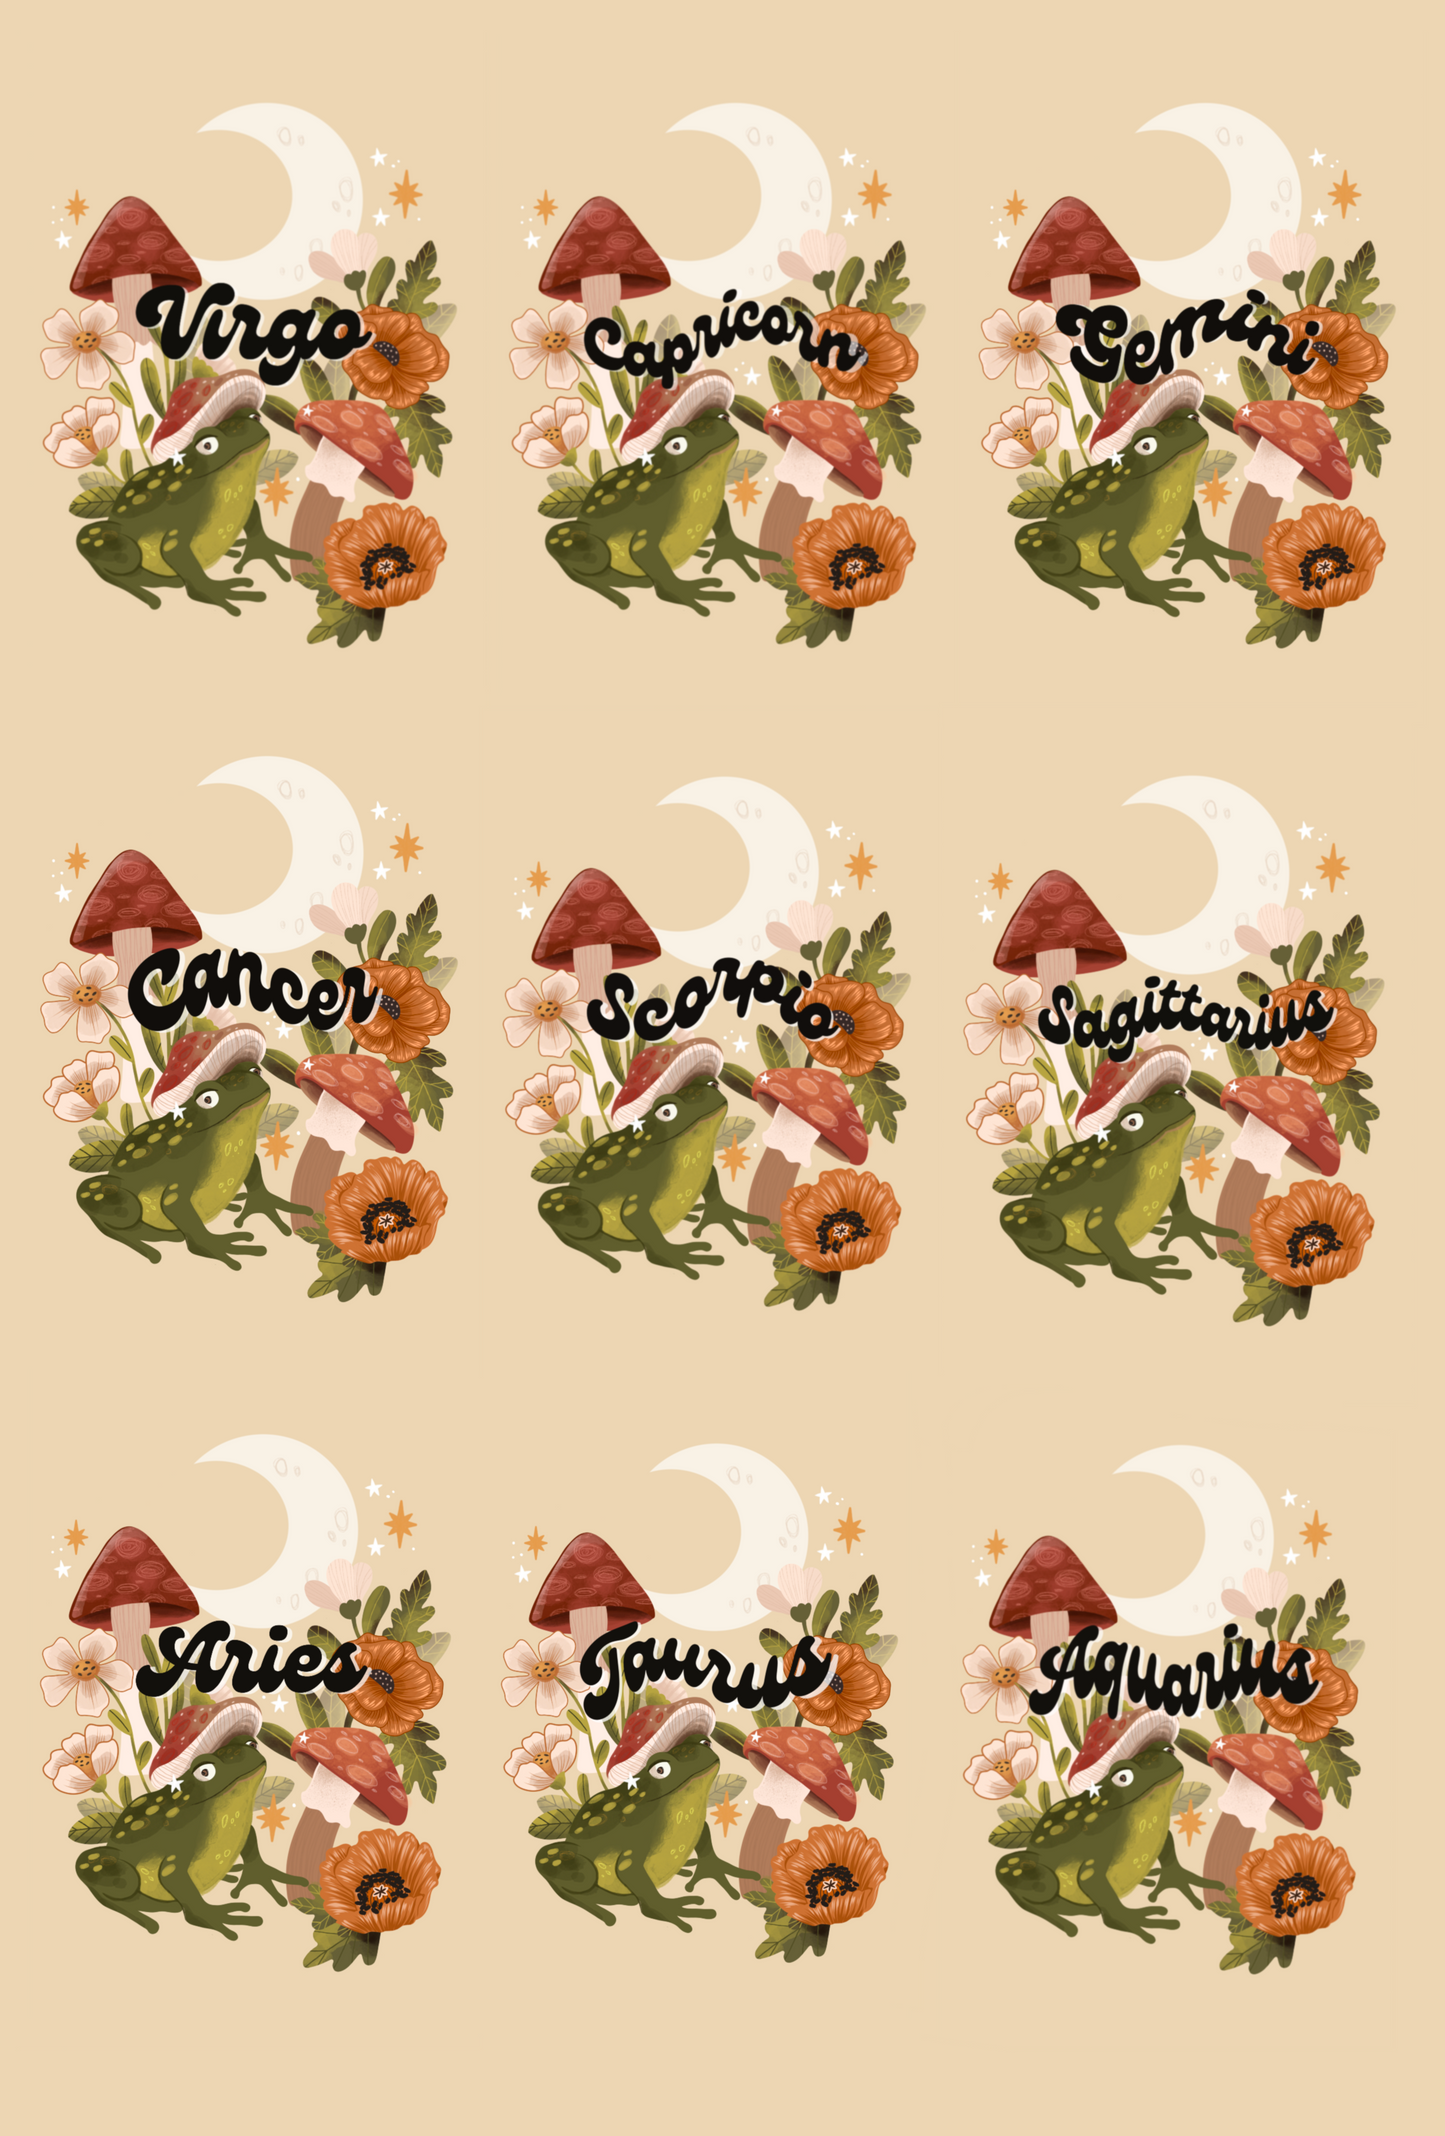 Zodiac/Star Signs Woodland Toad Theme Art Print ~ All signs available